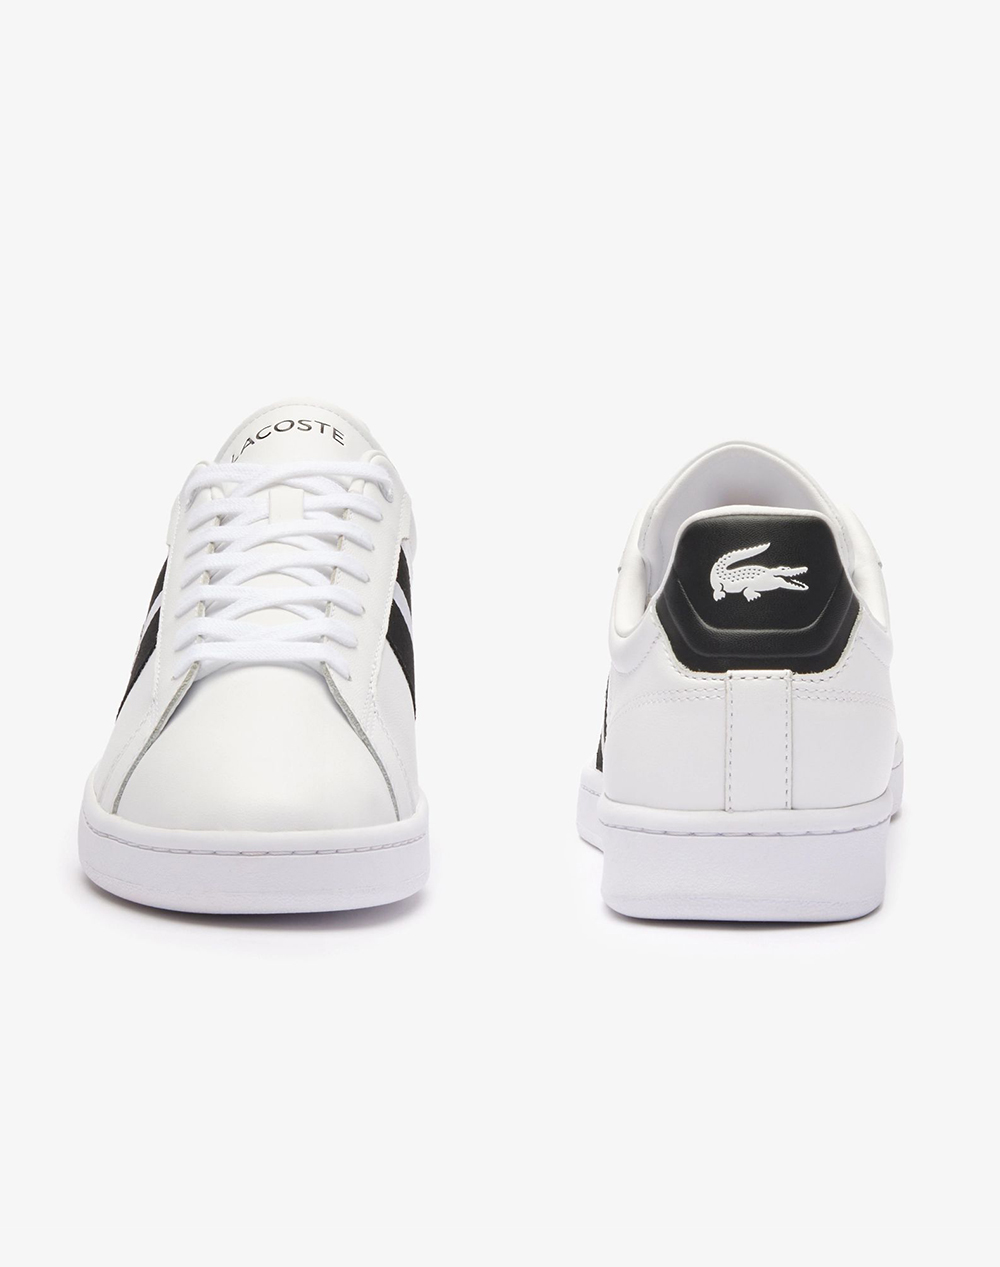 LACOSTE MENS CARNABY PRO CGR 124 1 SMA SHOES